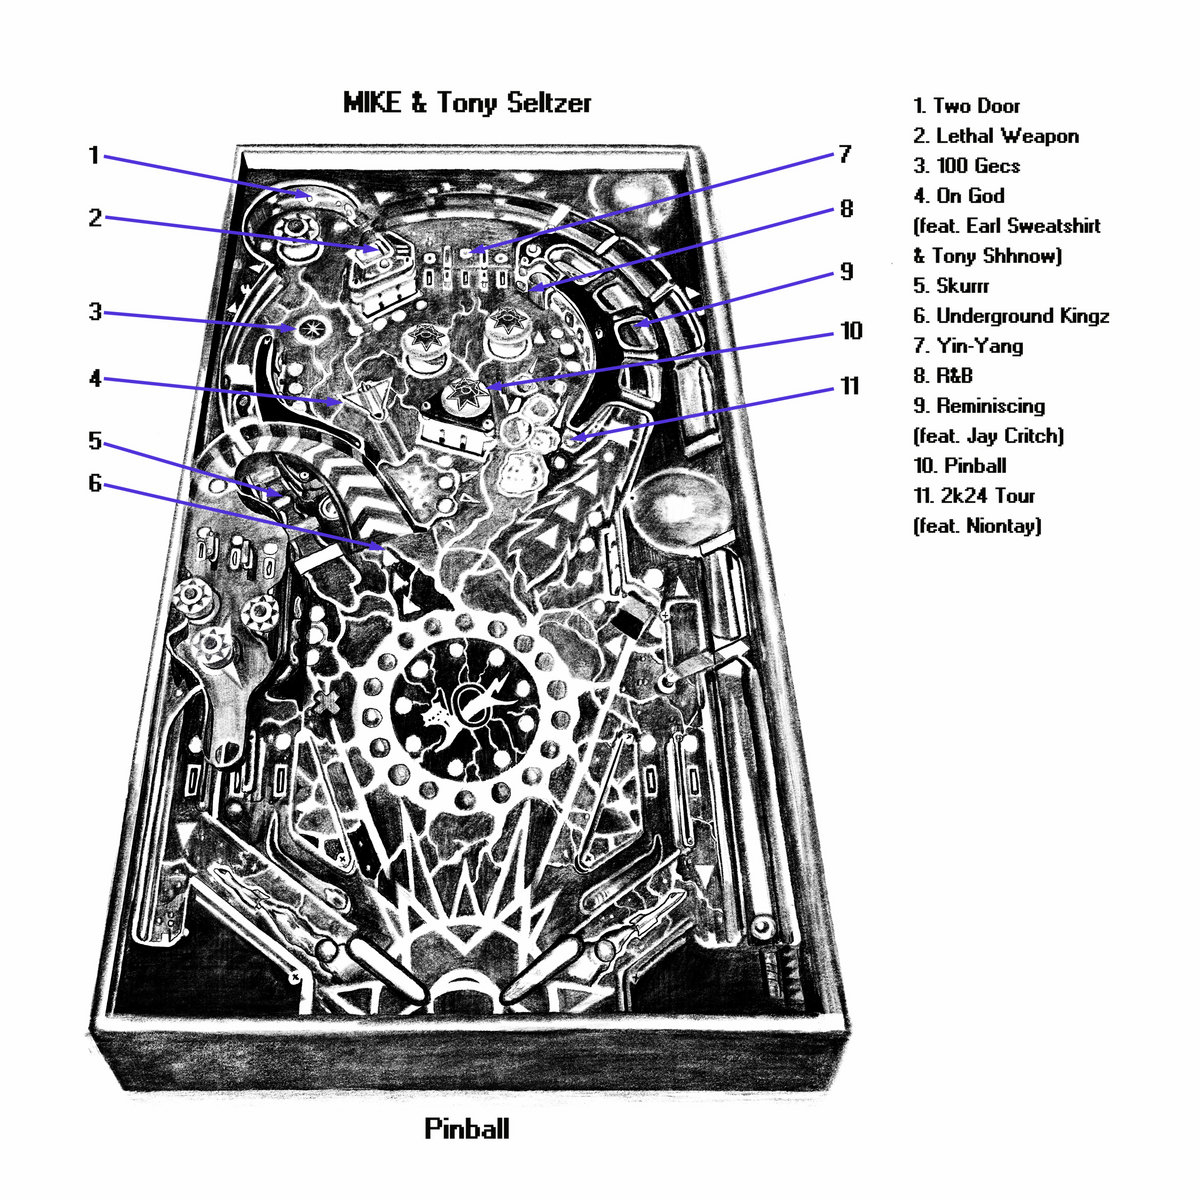 Illustration of a pinball machine with the tracklist of &quot;Pinball&quot; by MIKE &amp; Tony Seltzer, featuring 11 songs including collaborations with Earl Sweatshirt and Jay Critch